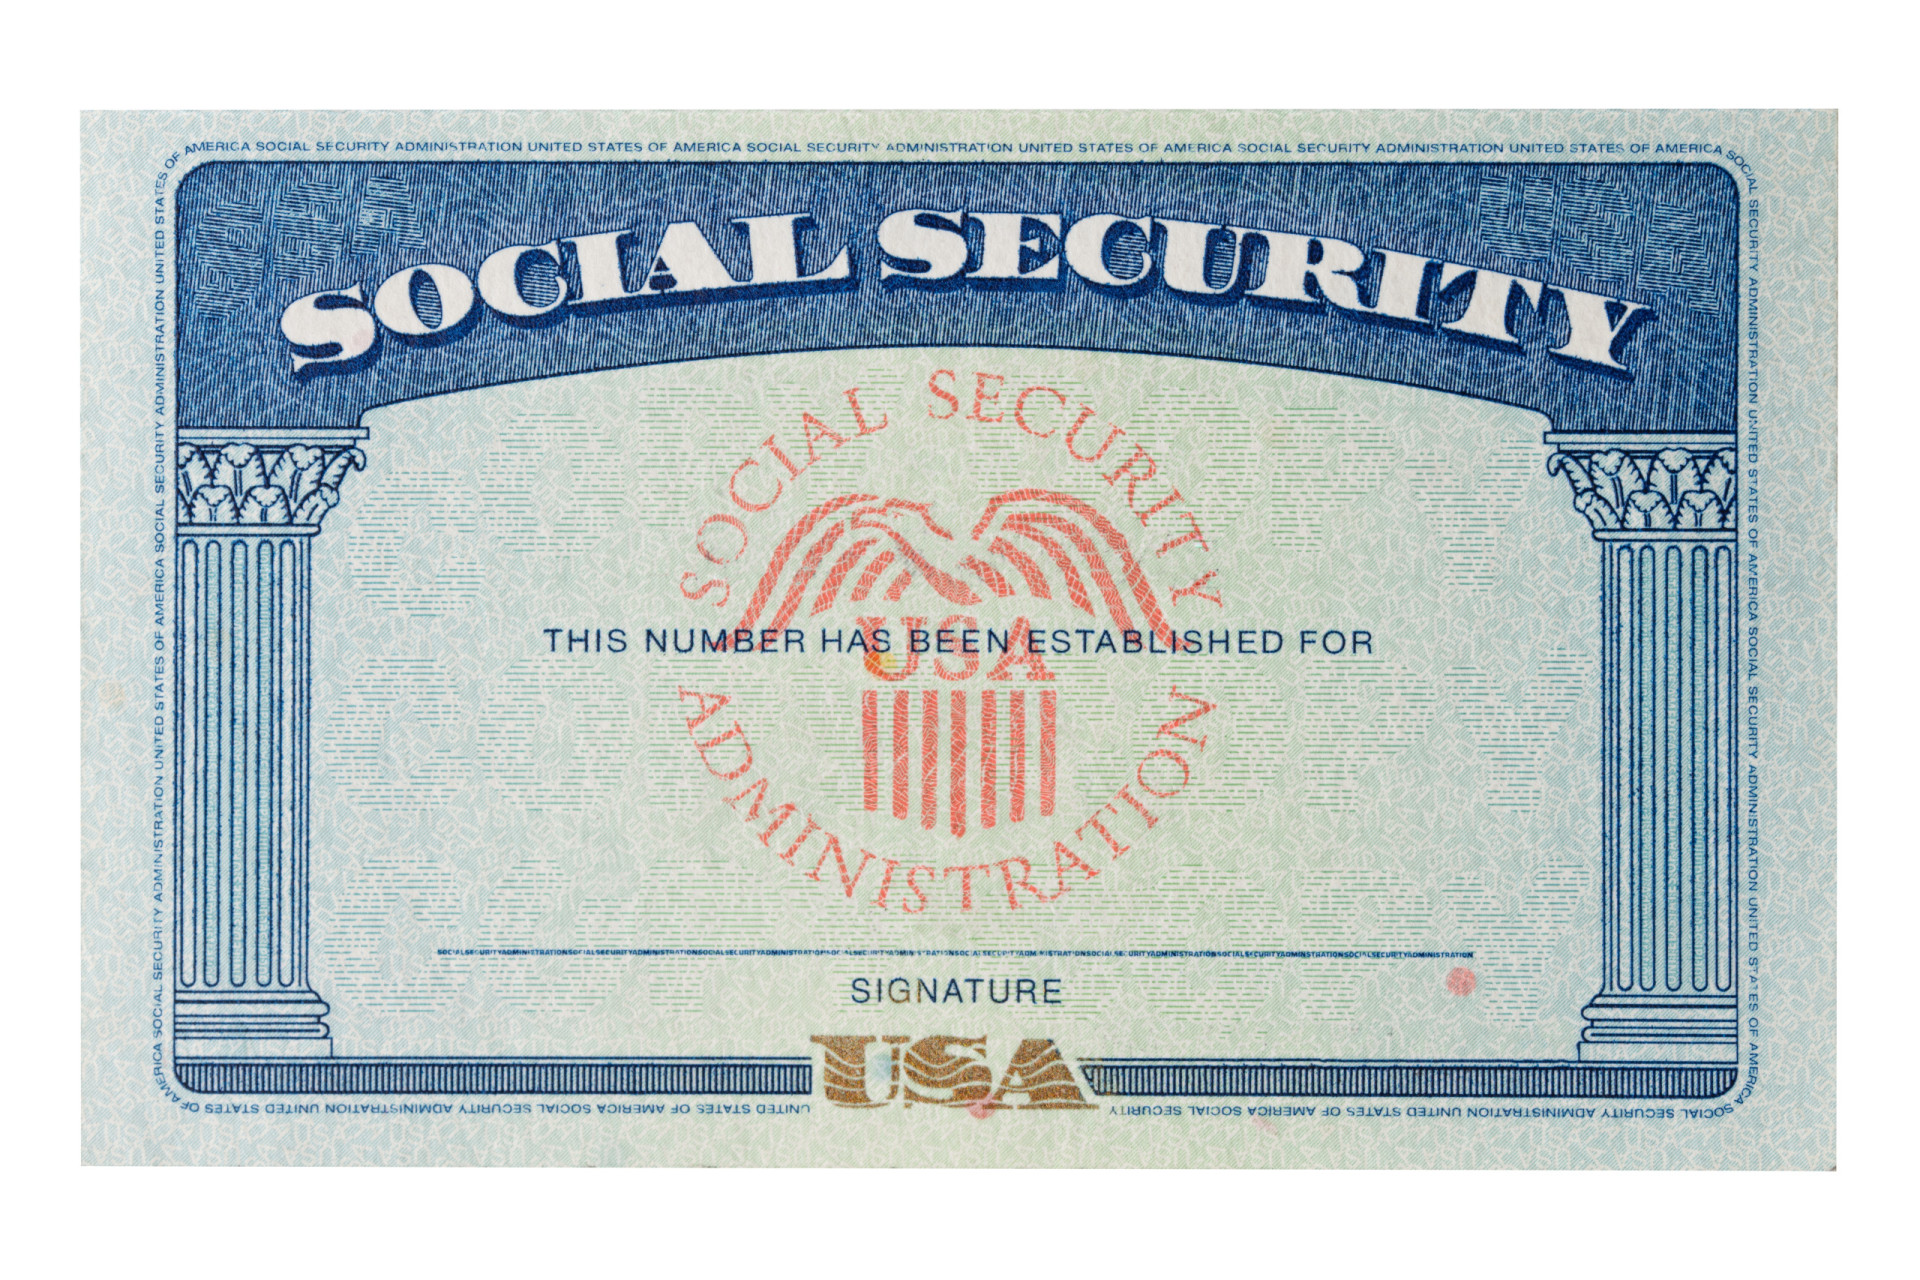 <p>A holder of a green card is afforded many of the same federal entitlements as US citizens, benefits such as social security, Medicare, Medicaid, and food assistance programs.</p><p>You may also like:<a href="https://www.starsinsider.com/n/460581?utm_source=msn.com&utm_medium=display&utm_campaign=referral_description&utm_content=721230en-us"> Talk show hosts reveal their worst guests</a></p>